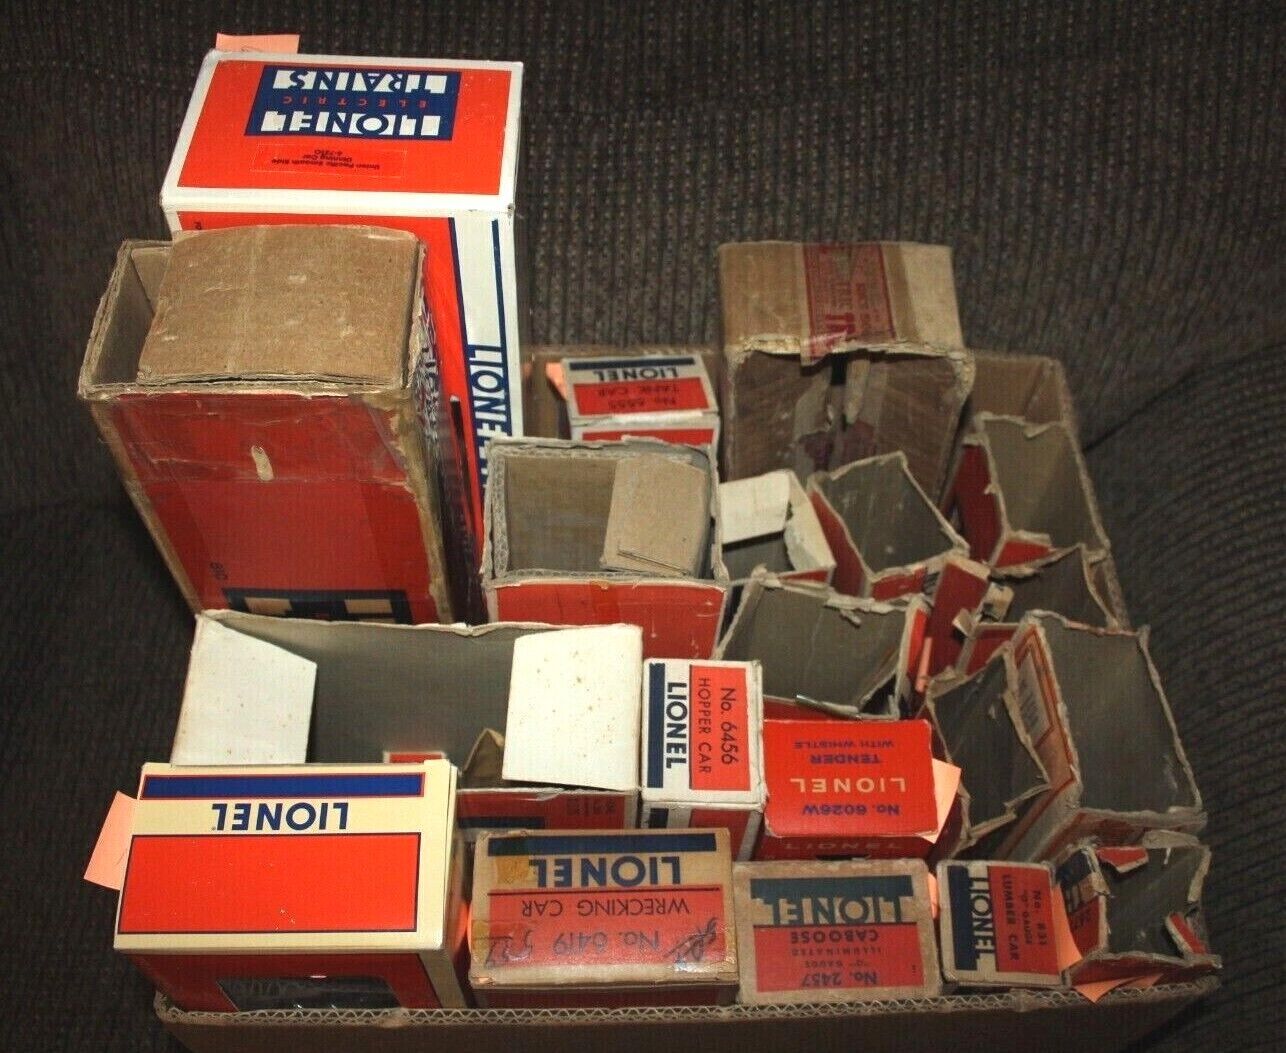 LIONEL Electric Trains Empty Boxes - Mail Boxes - Transforners - Instructions